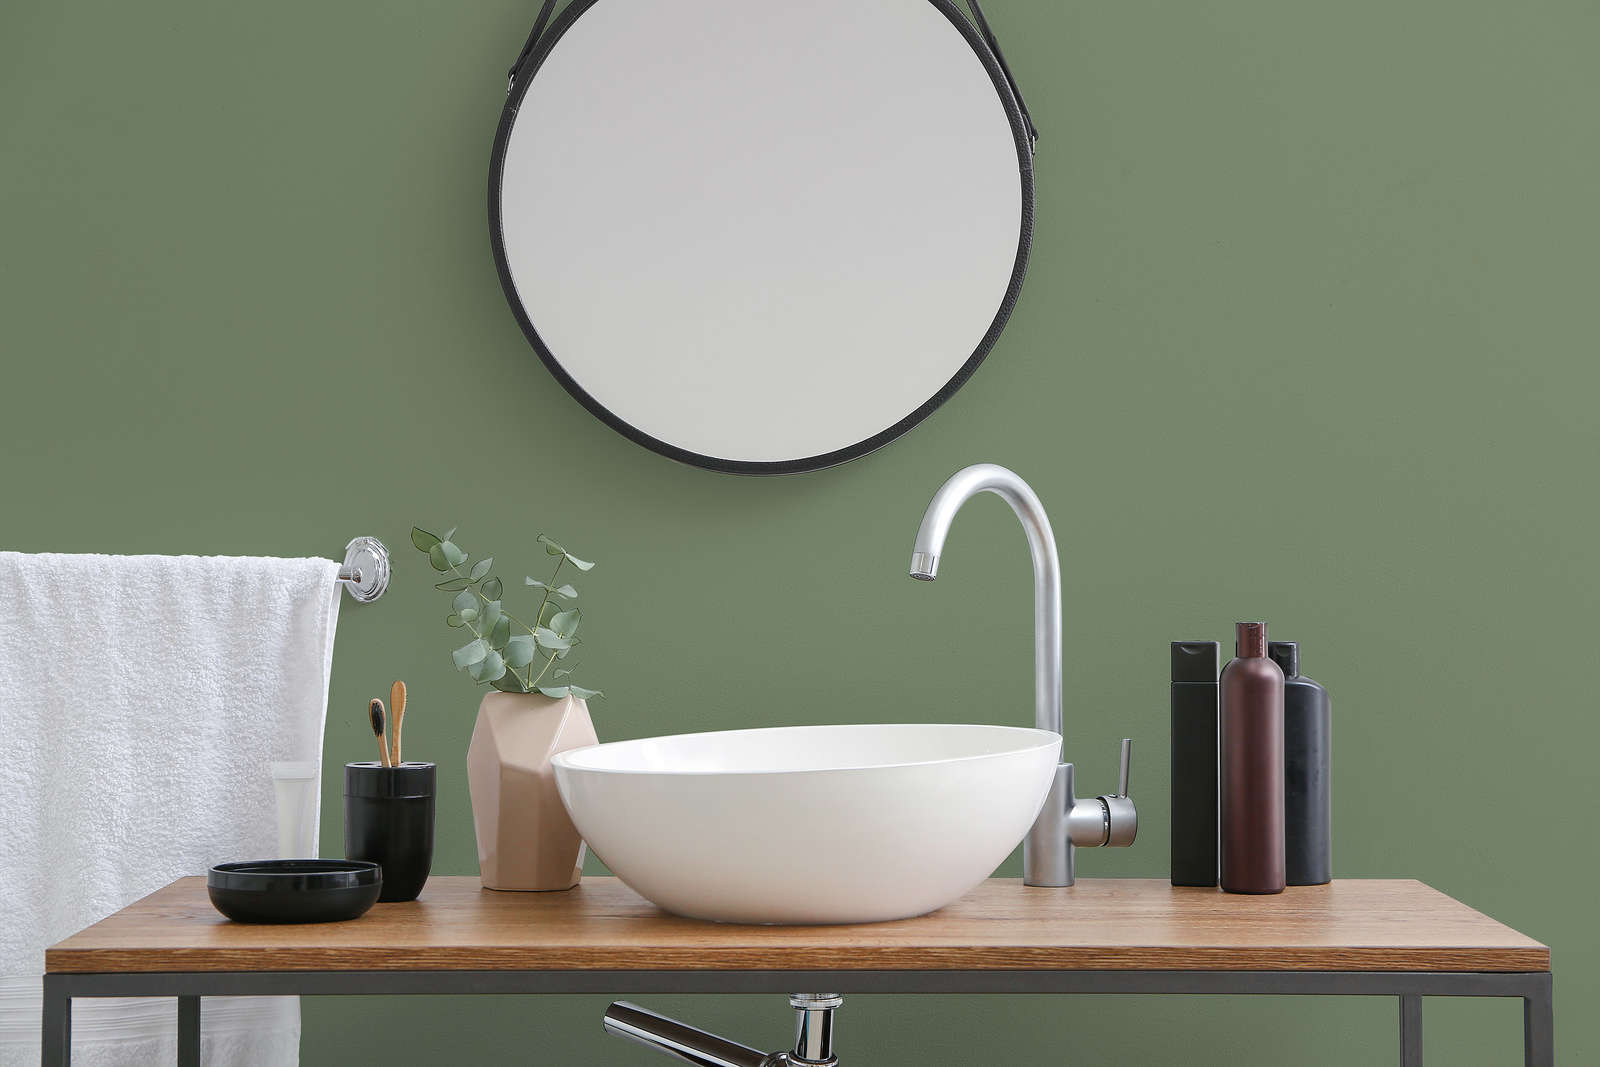             Premium Wall Paint Nature Olive Green »Gorgeous Green« NW503 – 5 litre
        